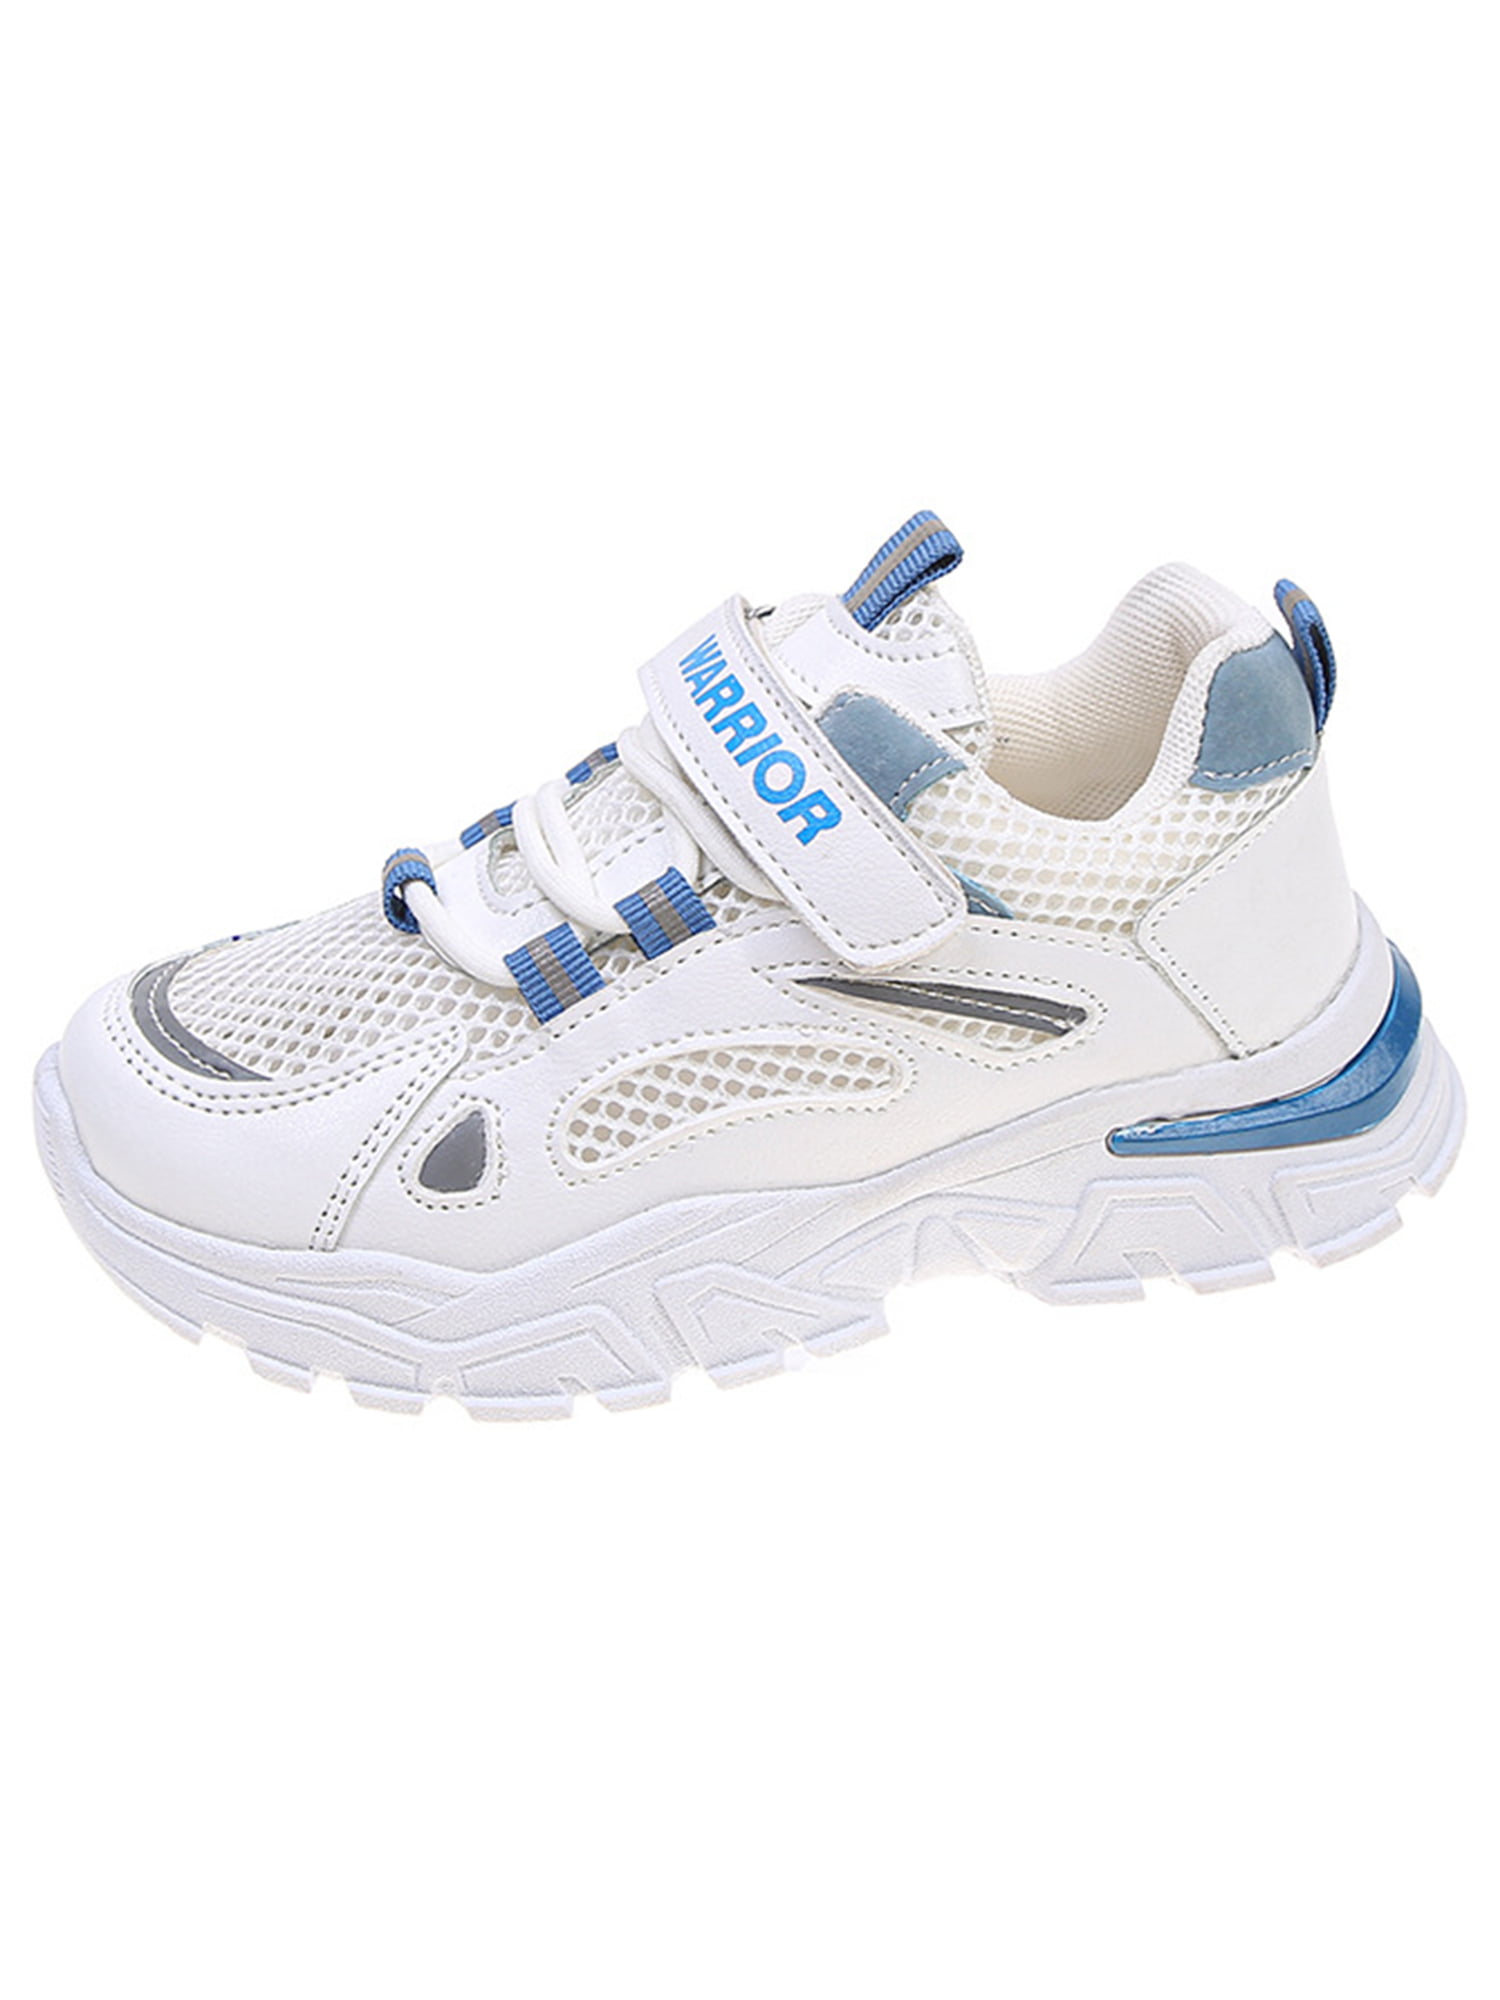 Kids Sneakers Comfort Athletic Running Walking Casual Shoes Girls Boys Trainers 